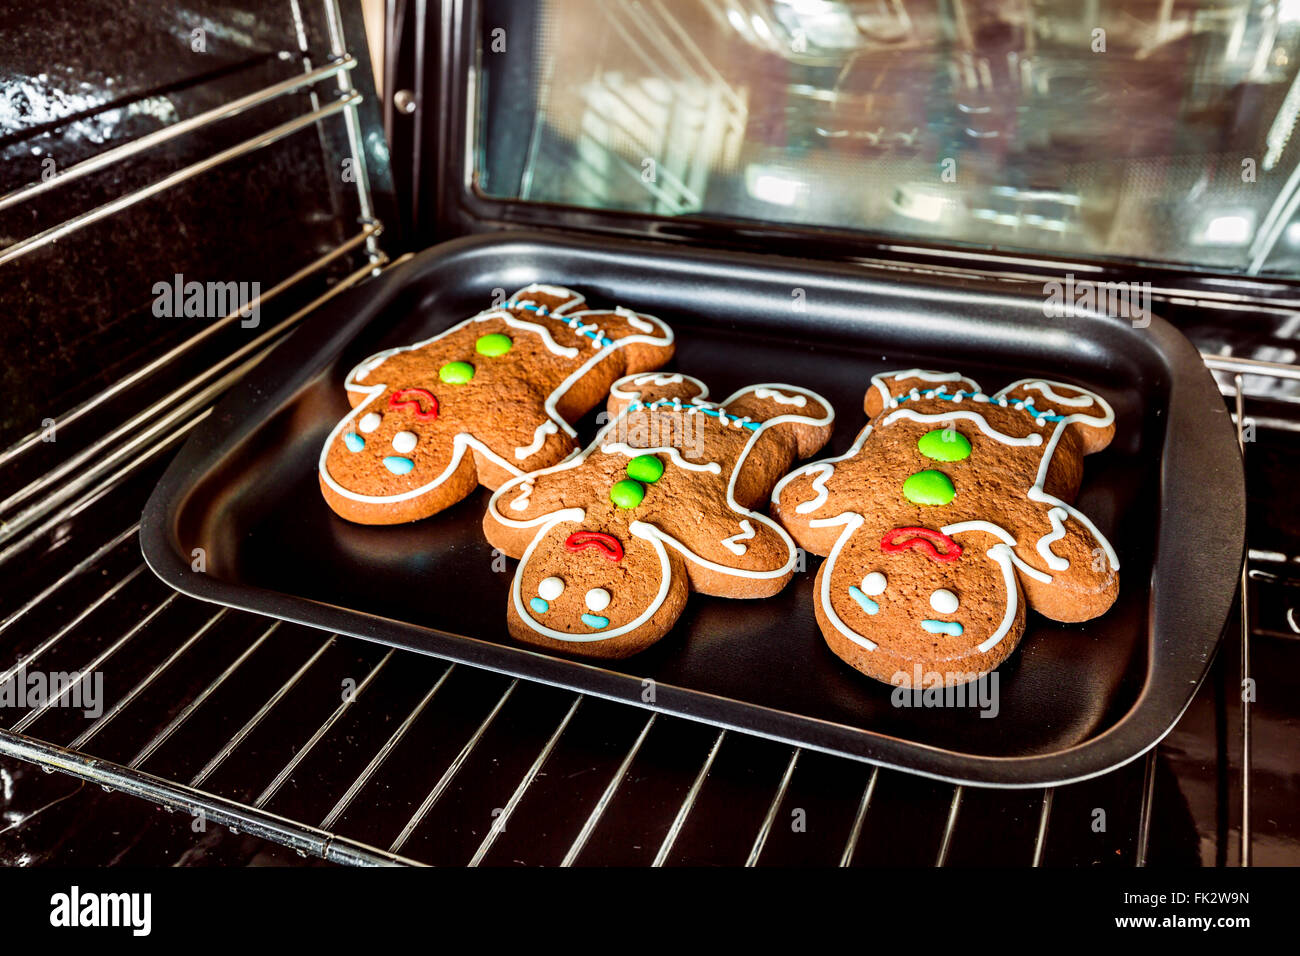 Baking Gingerbread man in the oven. Cooking in the oven. Stock Photo